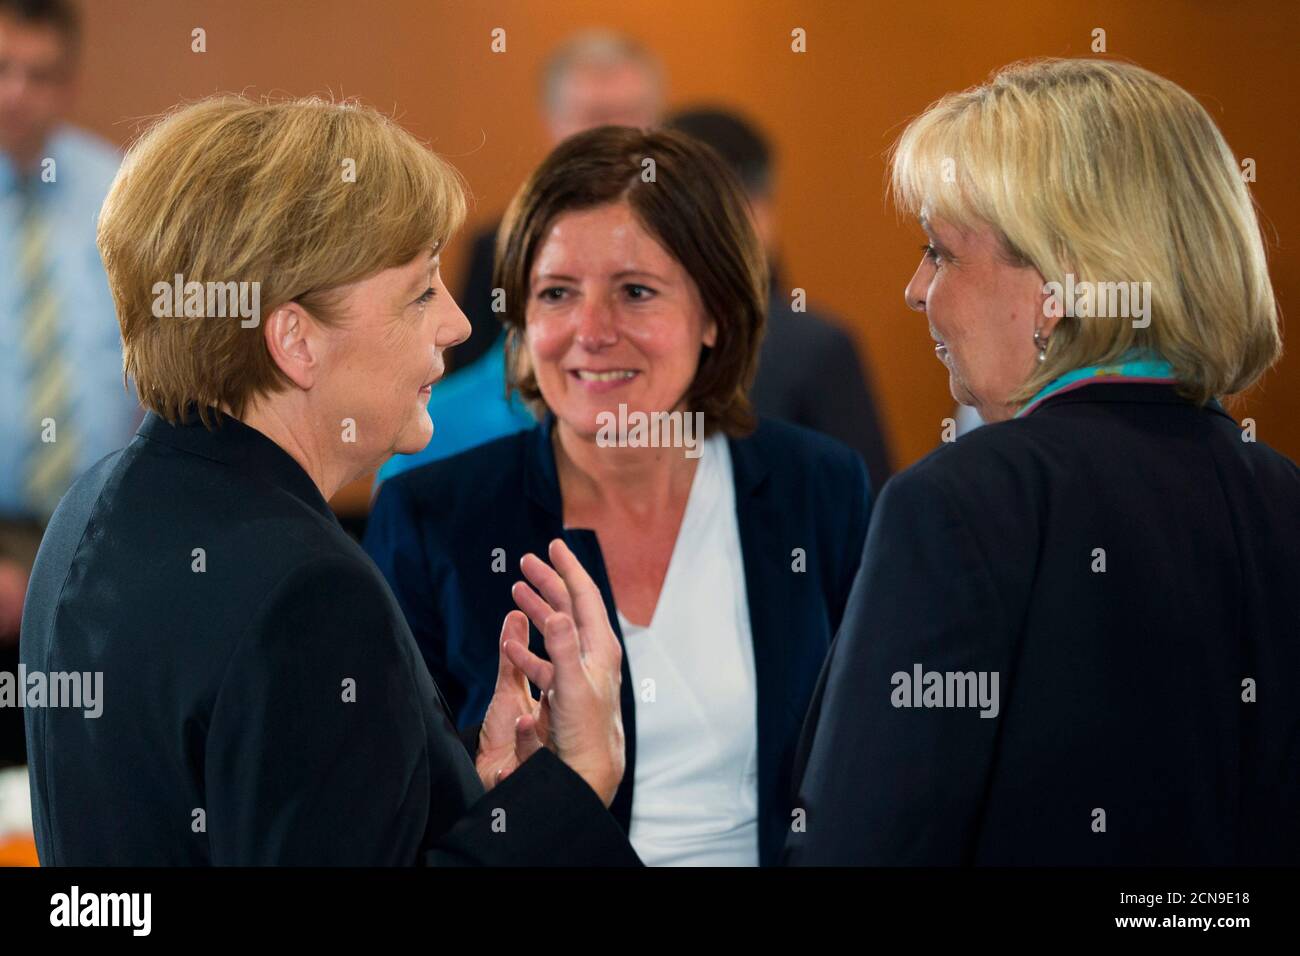 German Chancellor Angela Merkel (L) talks with Rhineland-Palatinate State Prime Minister Malu Dreyer (2nd L) and North Rhine-Westphalia State Premier Hannelore Kraft before a meeting of the government with the heads of Germany's federal states at the Chancellery in Berlin, June 12, 2014. REUTERS/Thomas Peter (GERMANY - Tags: POLITICS) Stock Photo